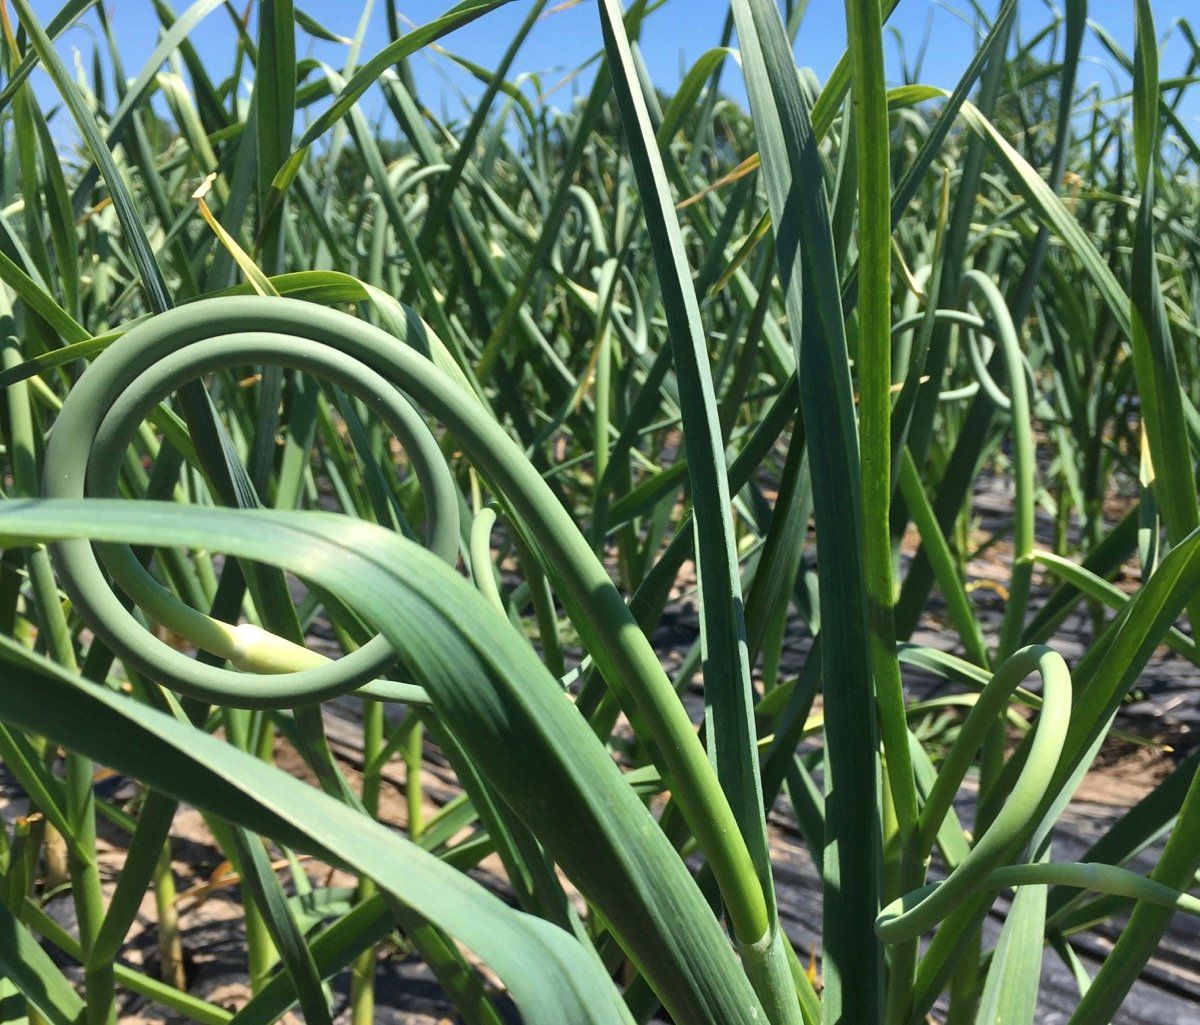 Next Happening: Growing great ~ Pick up tips ~ Garlic Scapes